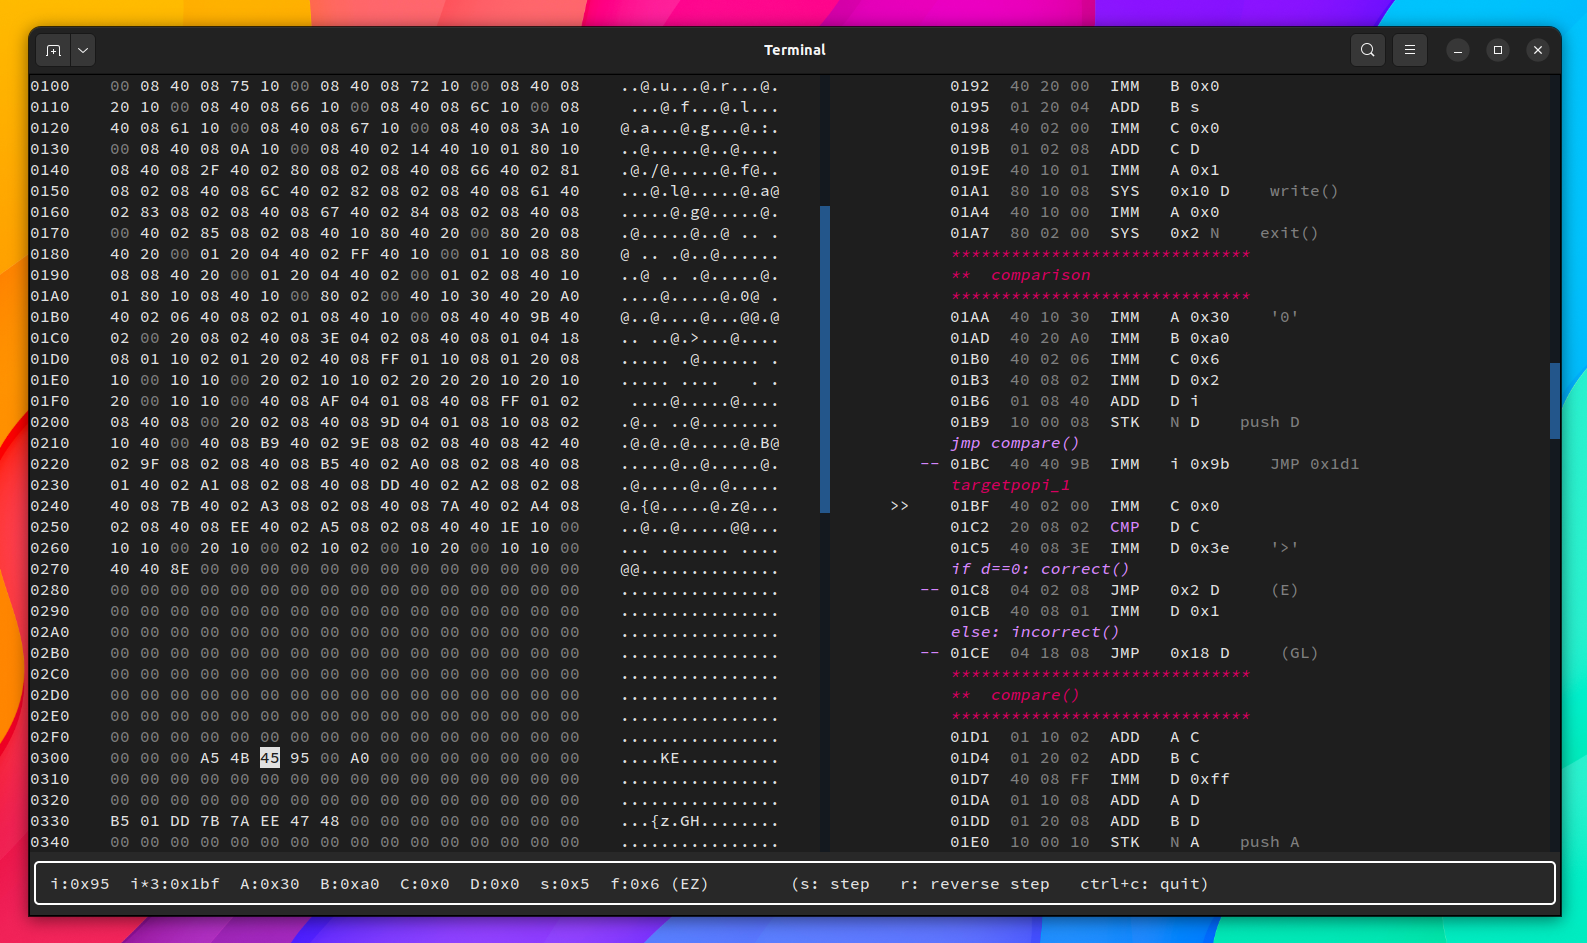 Screenshot of a terminal showing a Textual User interface resembling a debugger. the terminal is split in two vertical sections. on the left there is a hexdump, on the right there is a disassembly listing. an ascii arrow points to the current instruction. At the bottom there is a row showing the values of some registers: registers A,B,C,D have a value of 0. register s has a value of 0x5, register f has a value of 0x6, which corresponds to the flags EZ. In the same row, there is a summary of the debugger commands: (s: step, r: reverse step, c: continue, ctrl-c: quit )